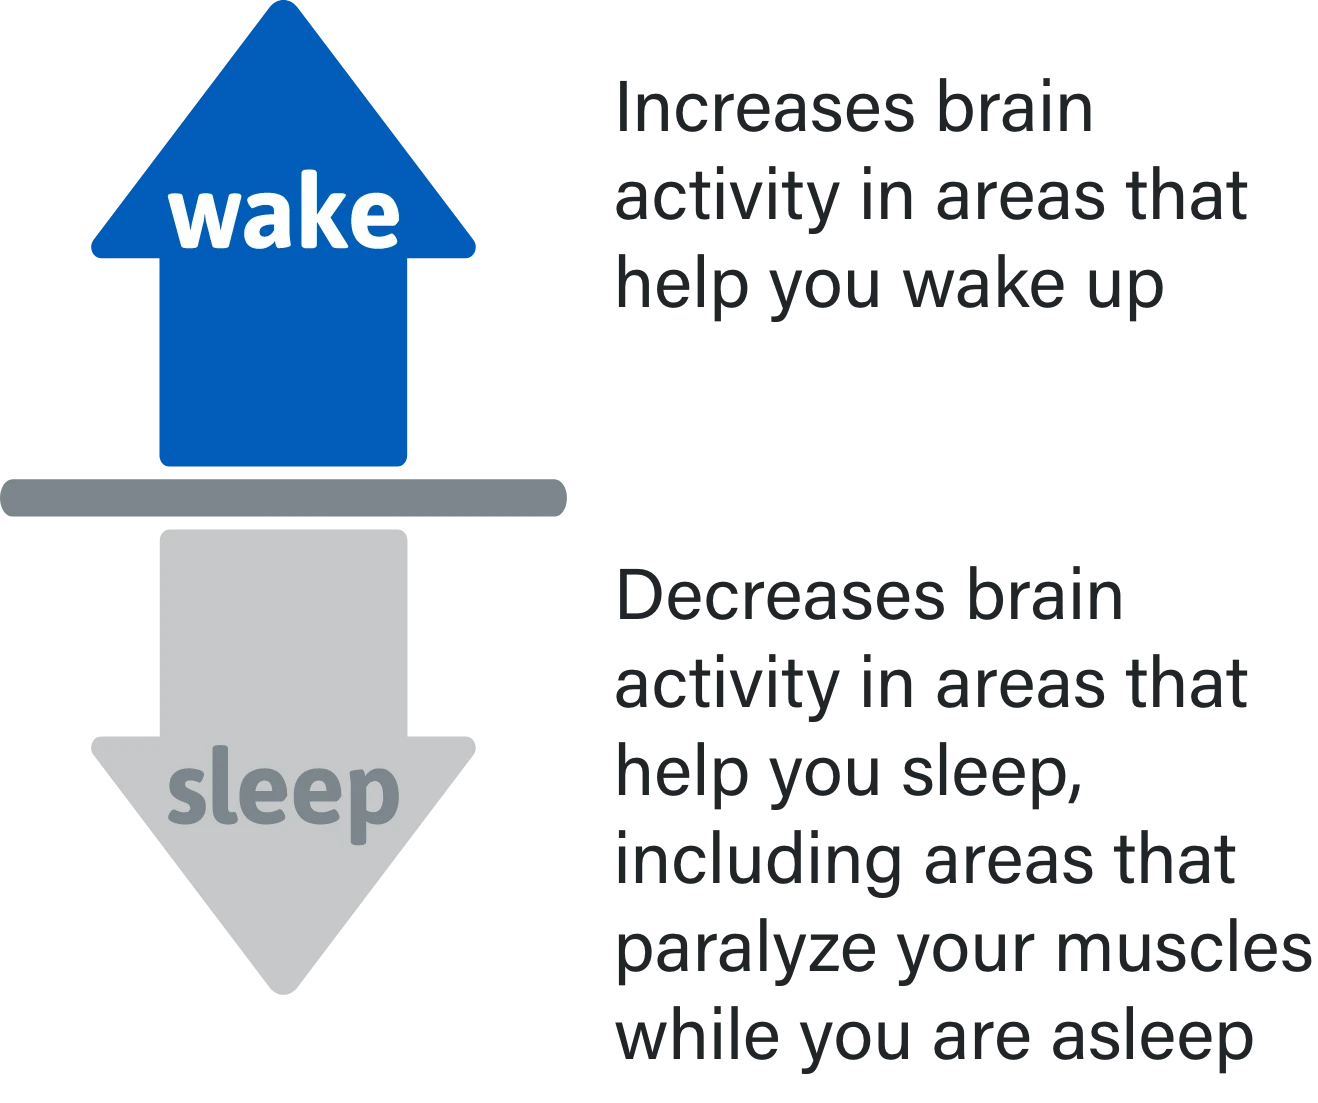 Arrow pointing up to represent increased wakefulness and arrow pointing down to represent reduced sleep